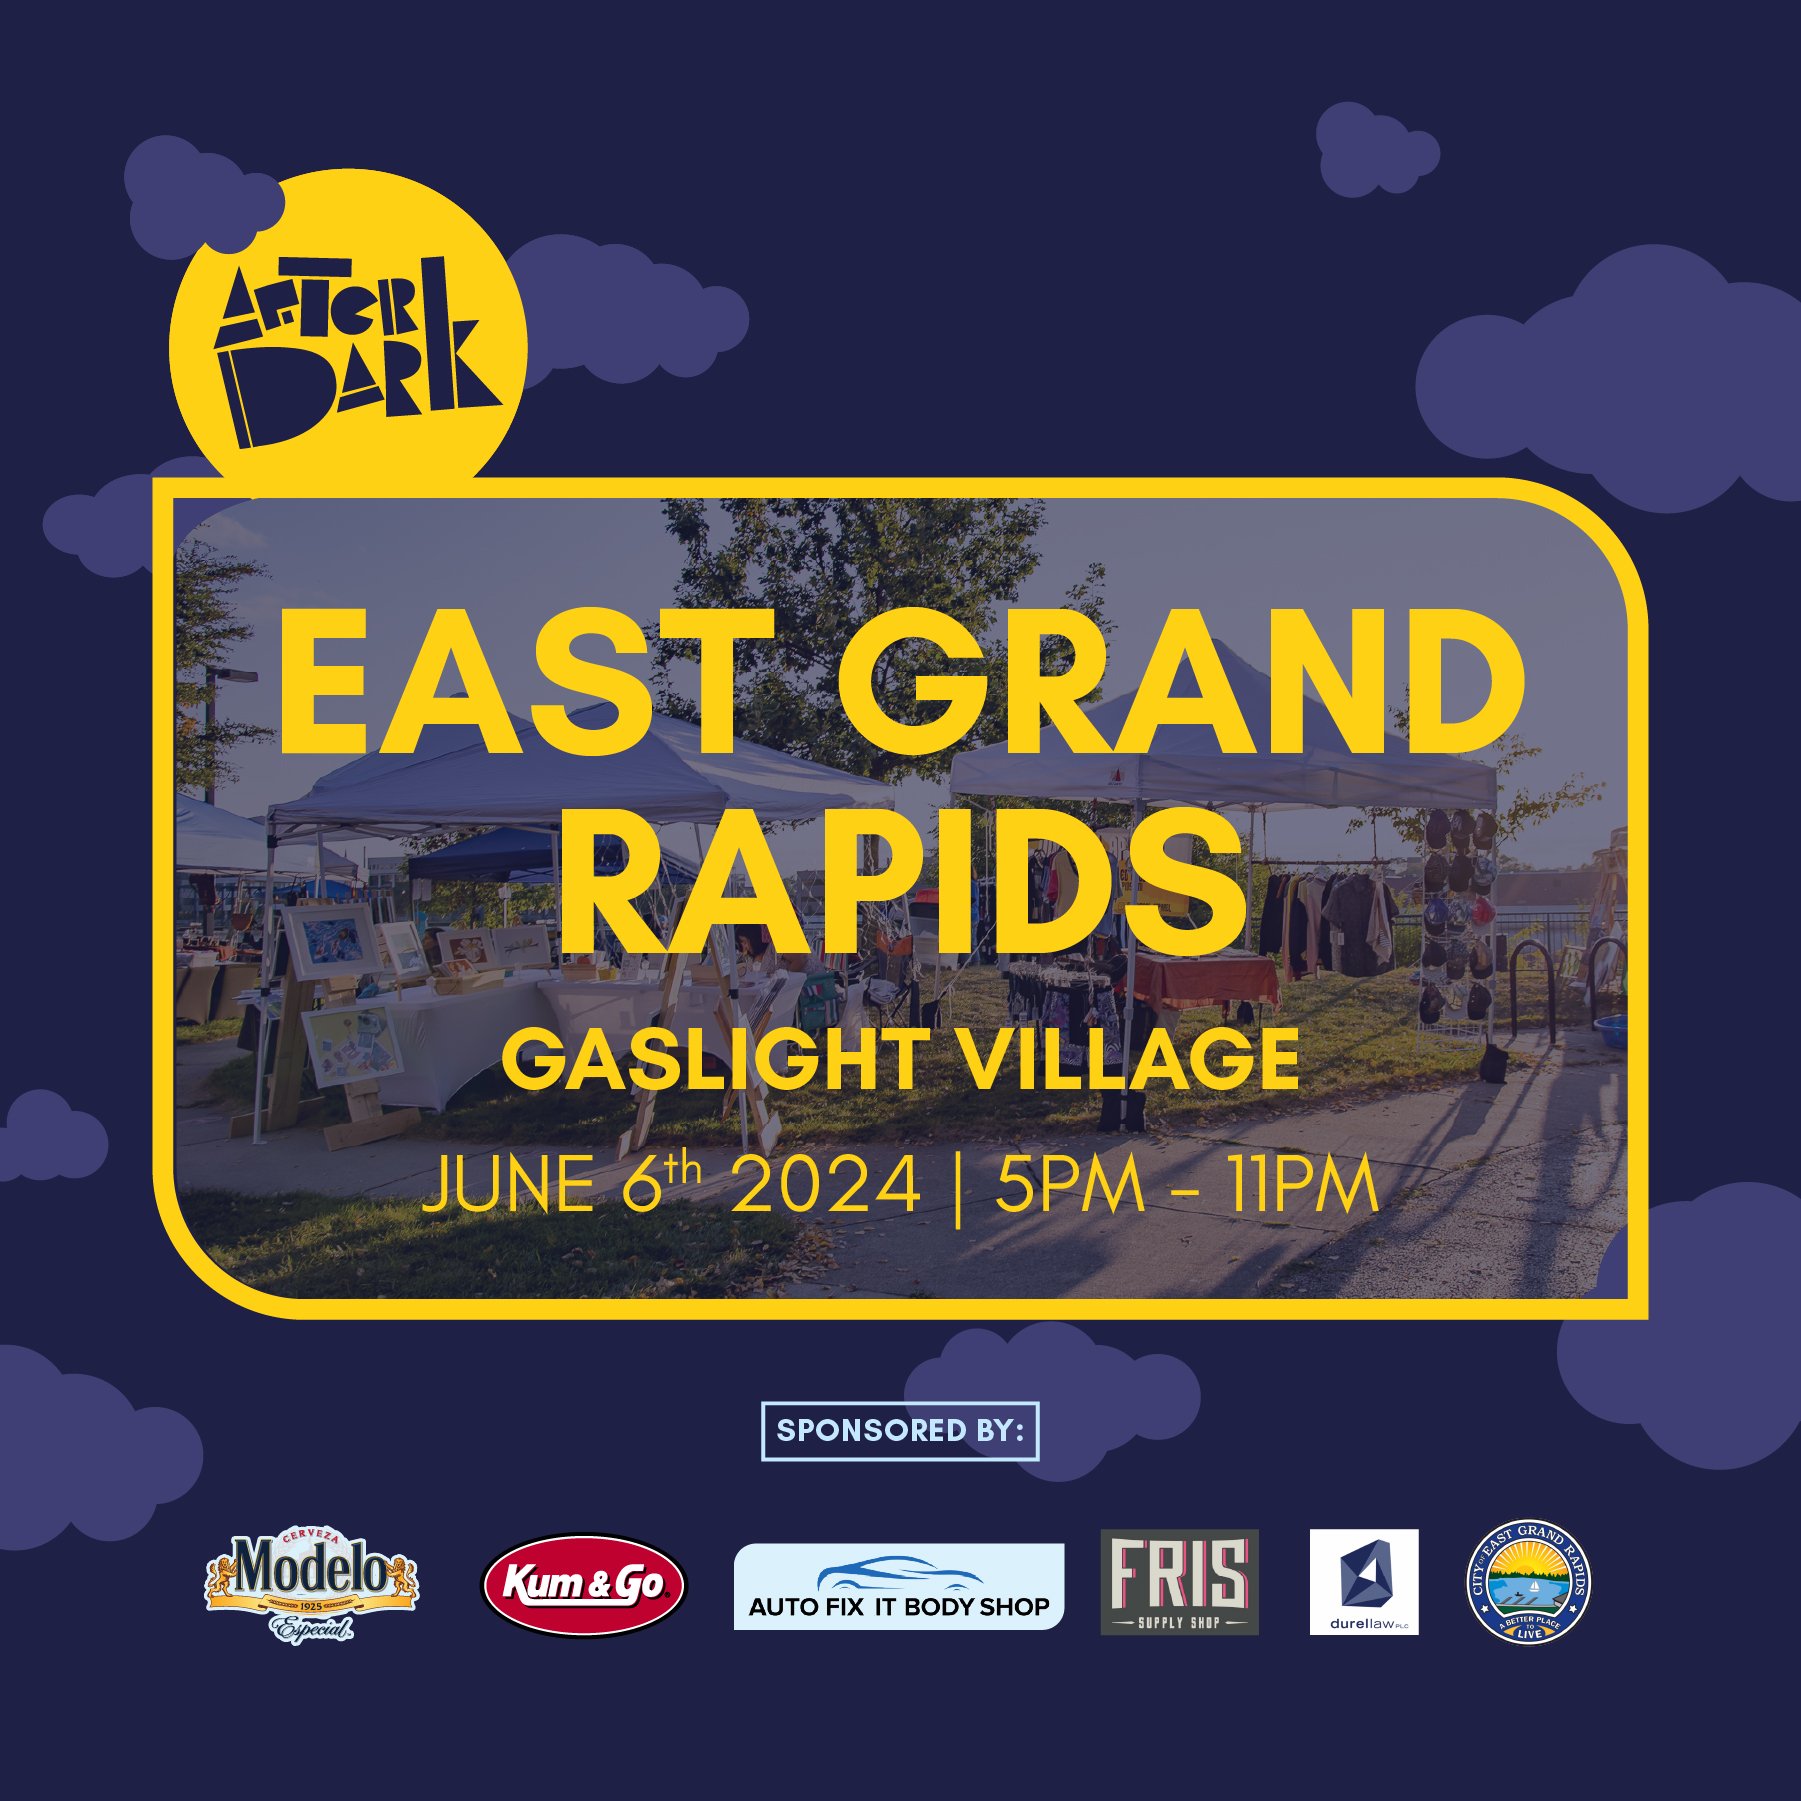 We are so excited for the return of our After Dark markets this summer! First on the line-up is East Grand Rapids, June 6th from 5-11pm in Gaslight Village.

We'll have more information to come, so stay tuned for our announcement on specialty vendors